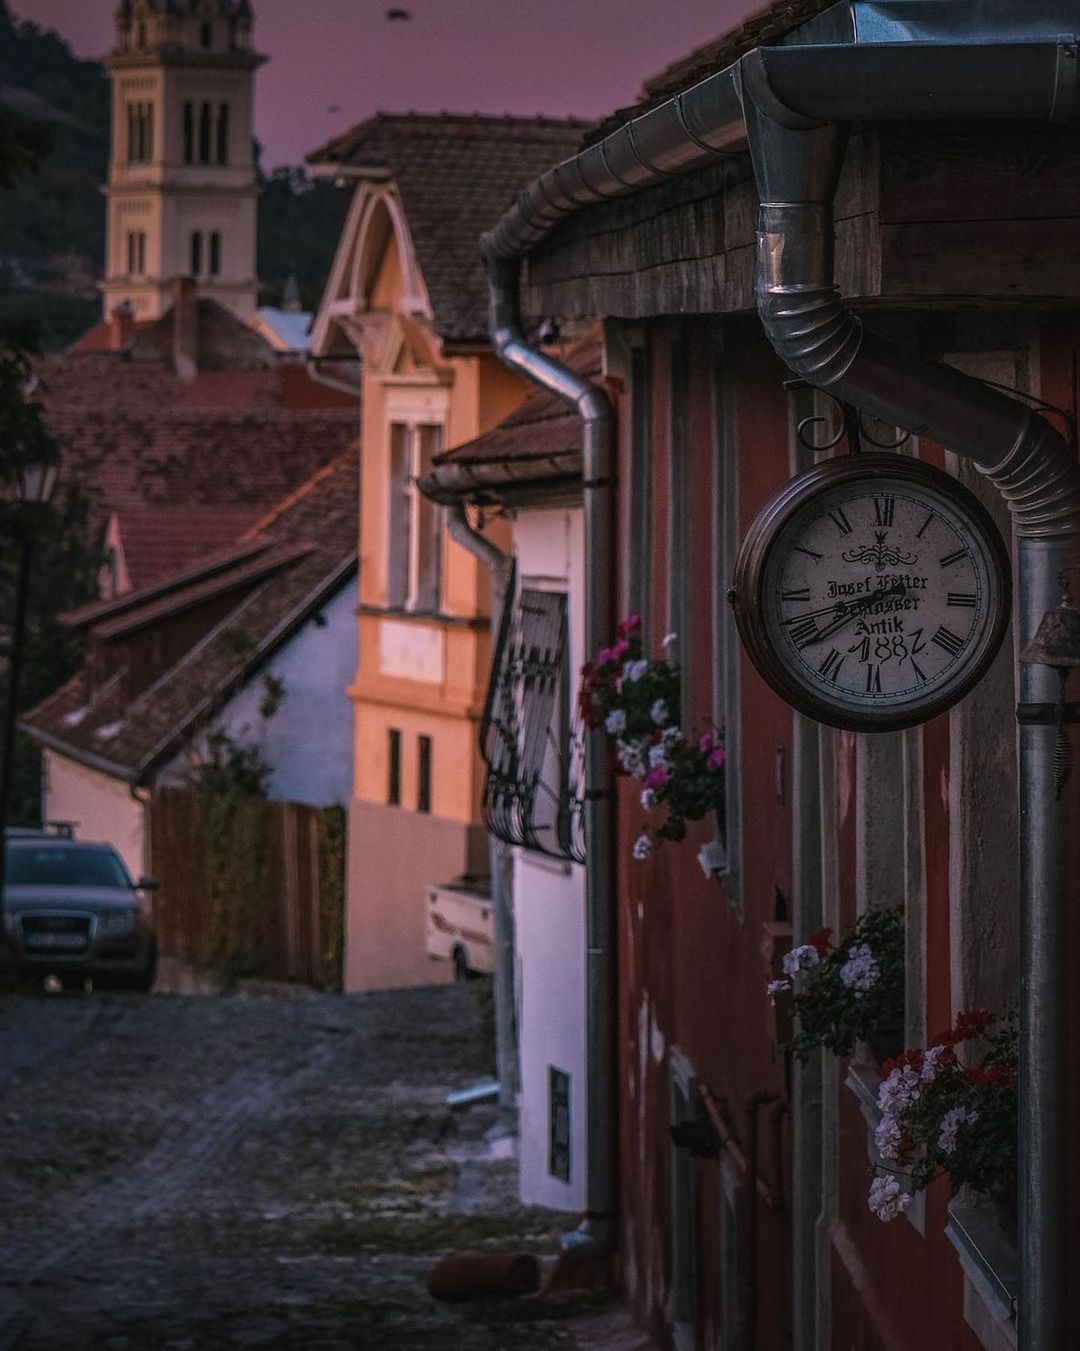 Step back in time and immerse yourself in the charming medieval town of Sighisoara 🏰 Halloween in Transylvania and Beyond